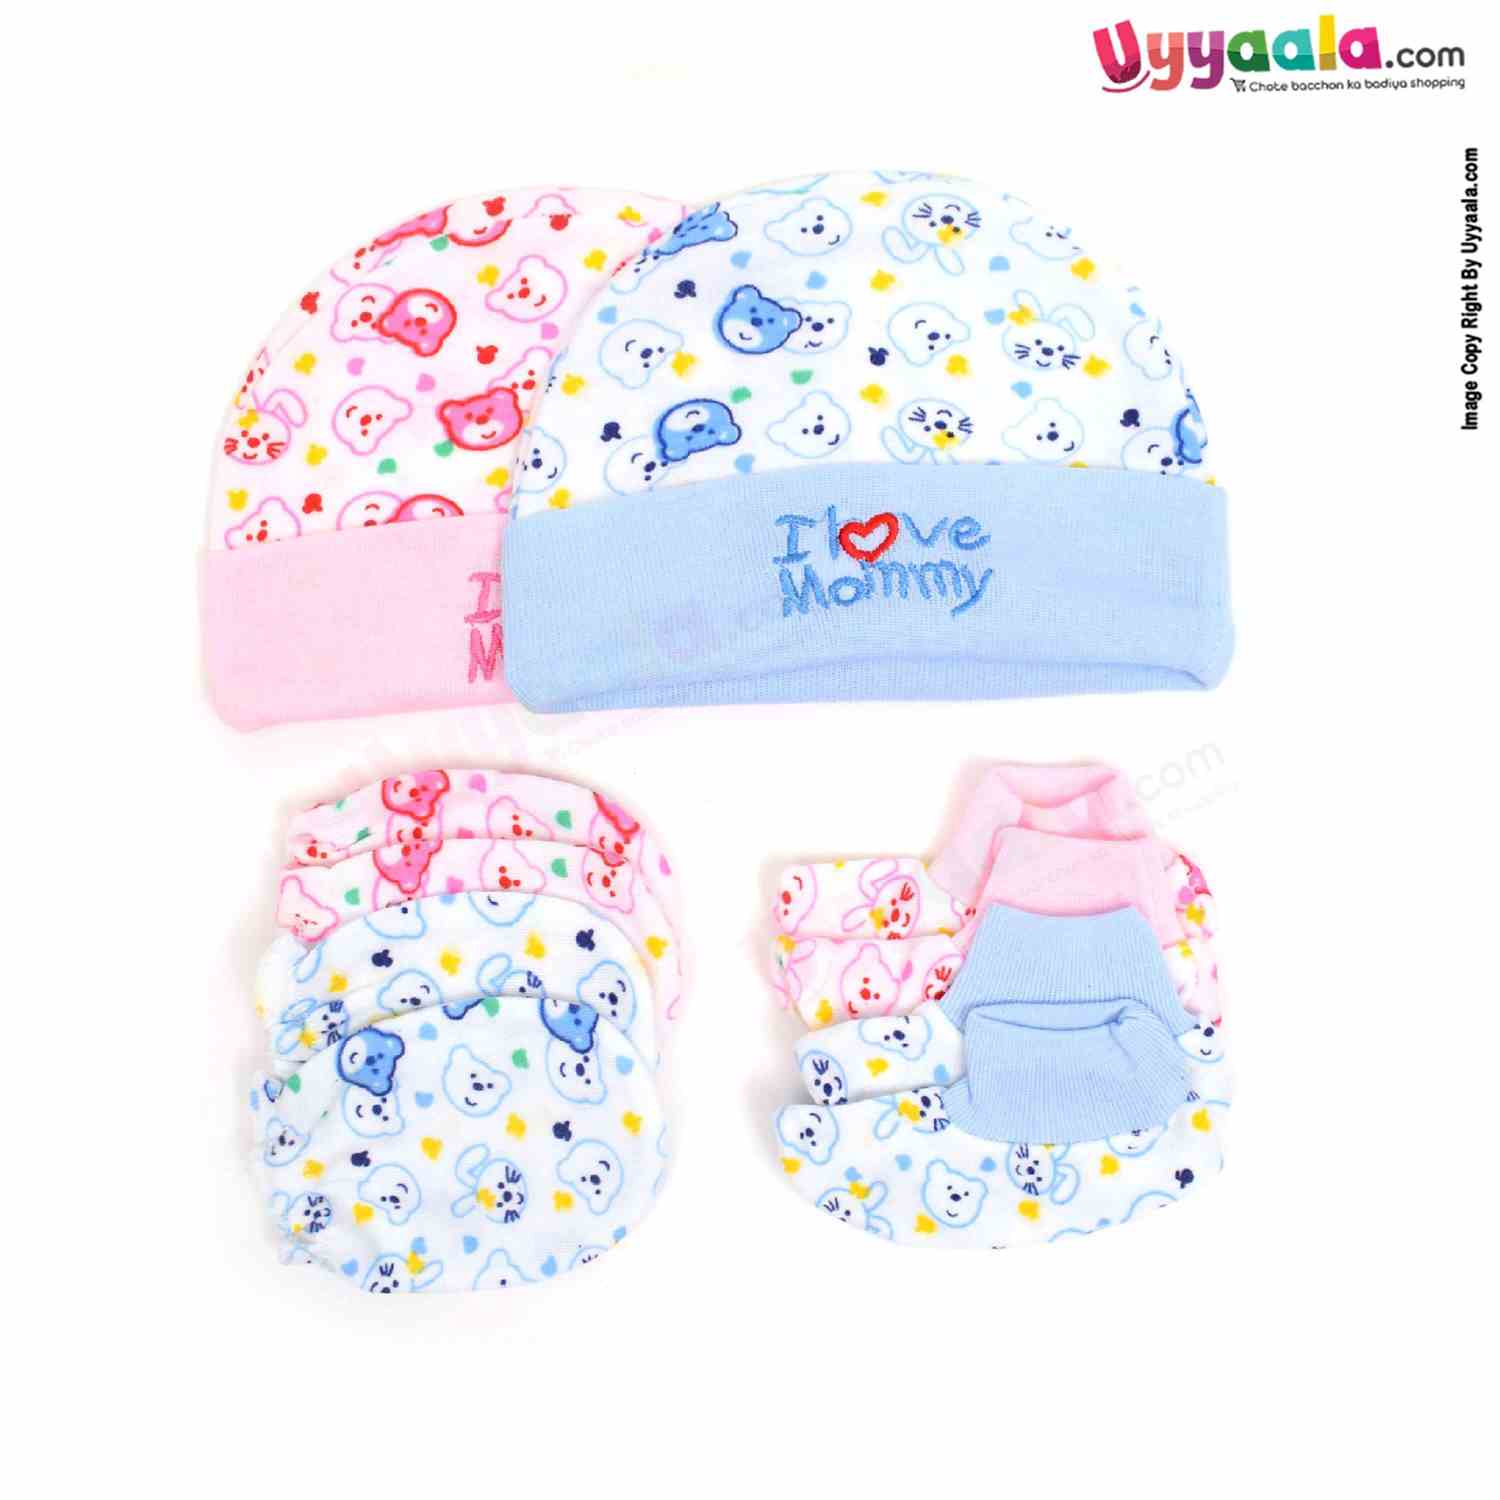 MONTALY Premium Quality Soft Hosiery Cotton Mitten, Booty & Cap Set for Babies with Bear Print Pack of 2 ,0-3m Age- Blue & Pink